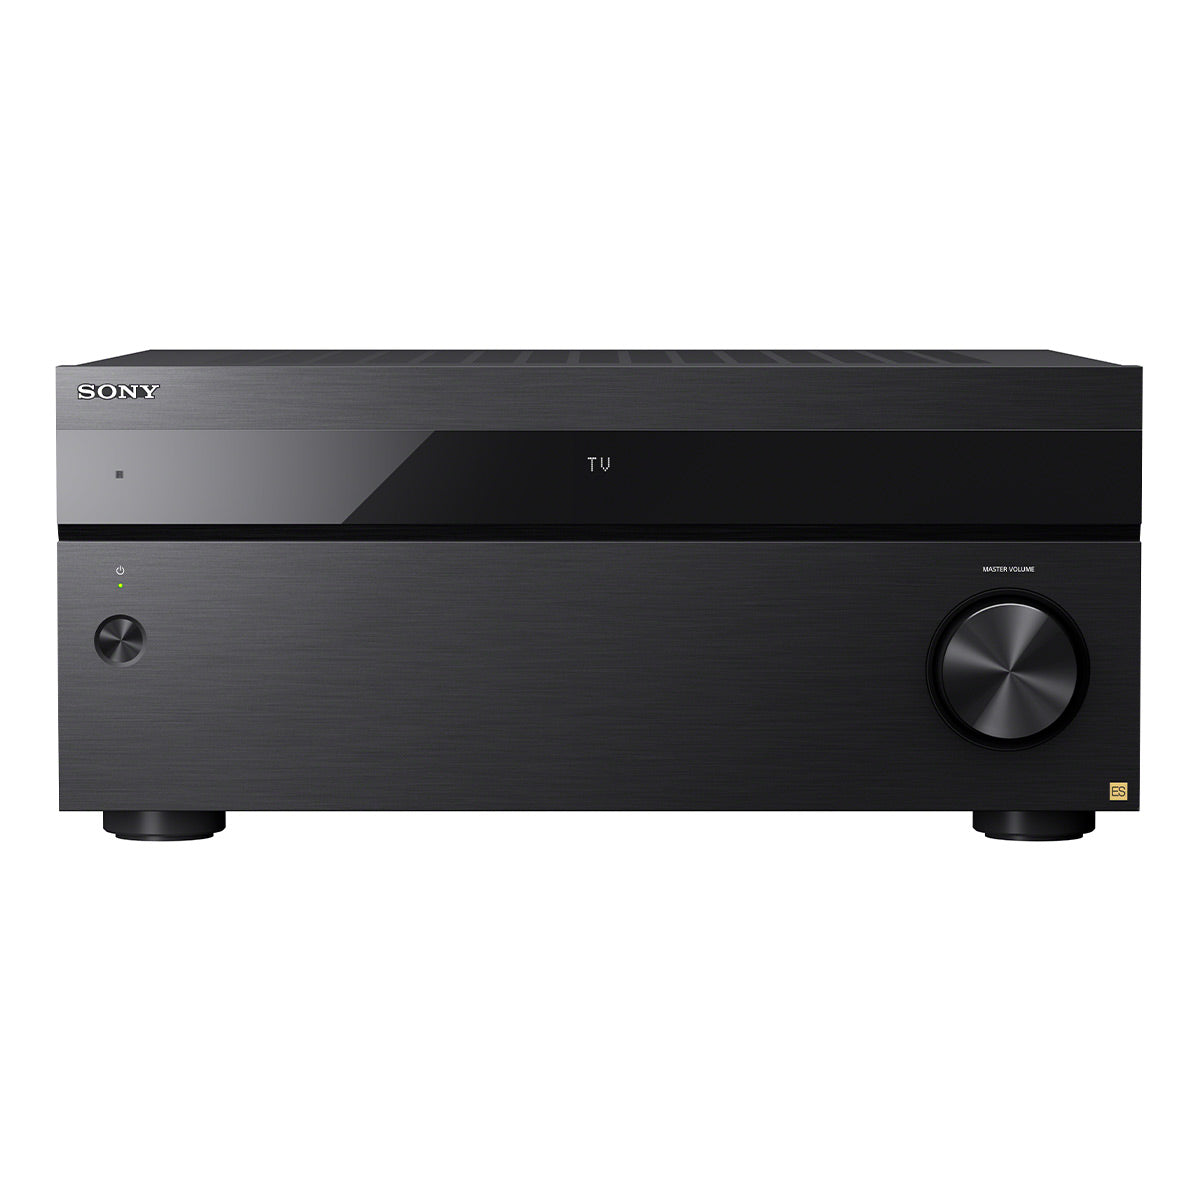 Home Theater - Home theater systems with projector, speakers, receiver,  mounting brackets, cables and more.